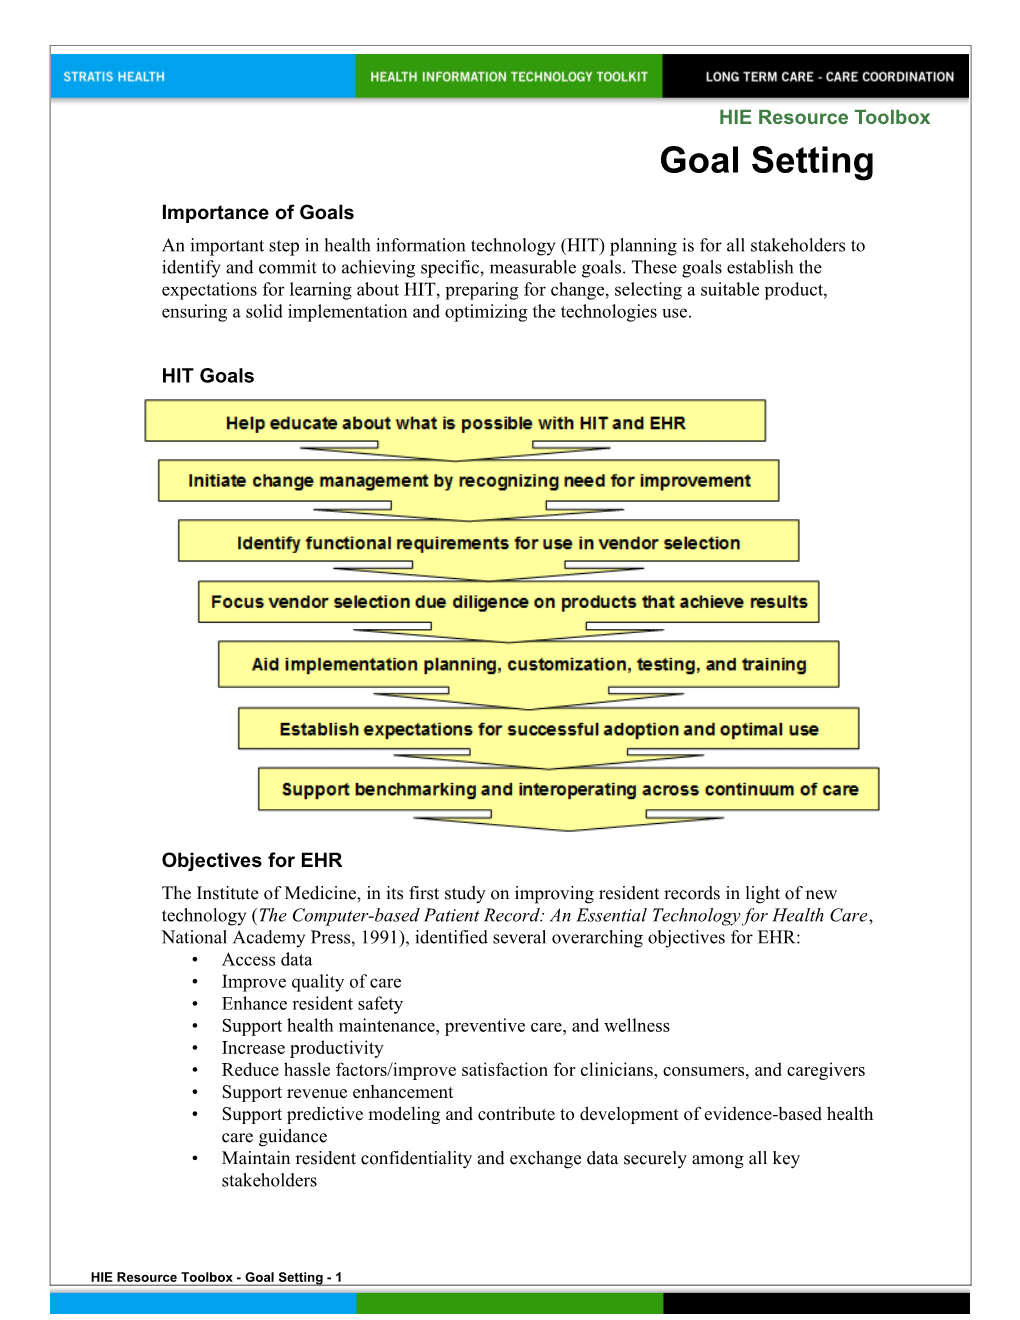 Goal Setting Health Information Technology Toolkit for Long Term Care - Care Coordination